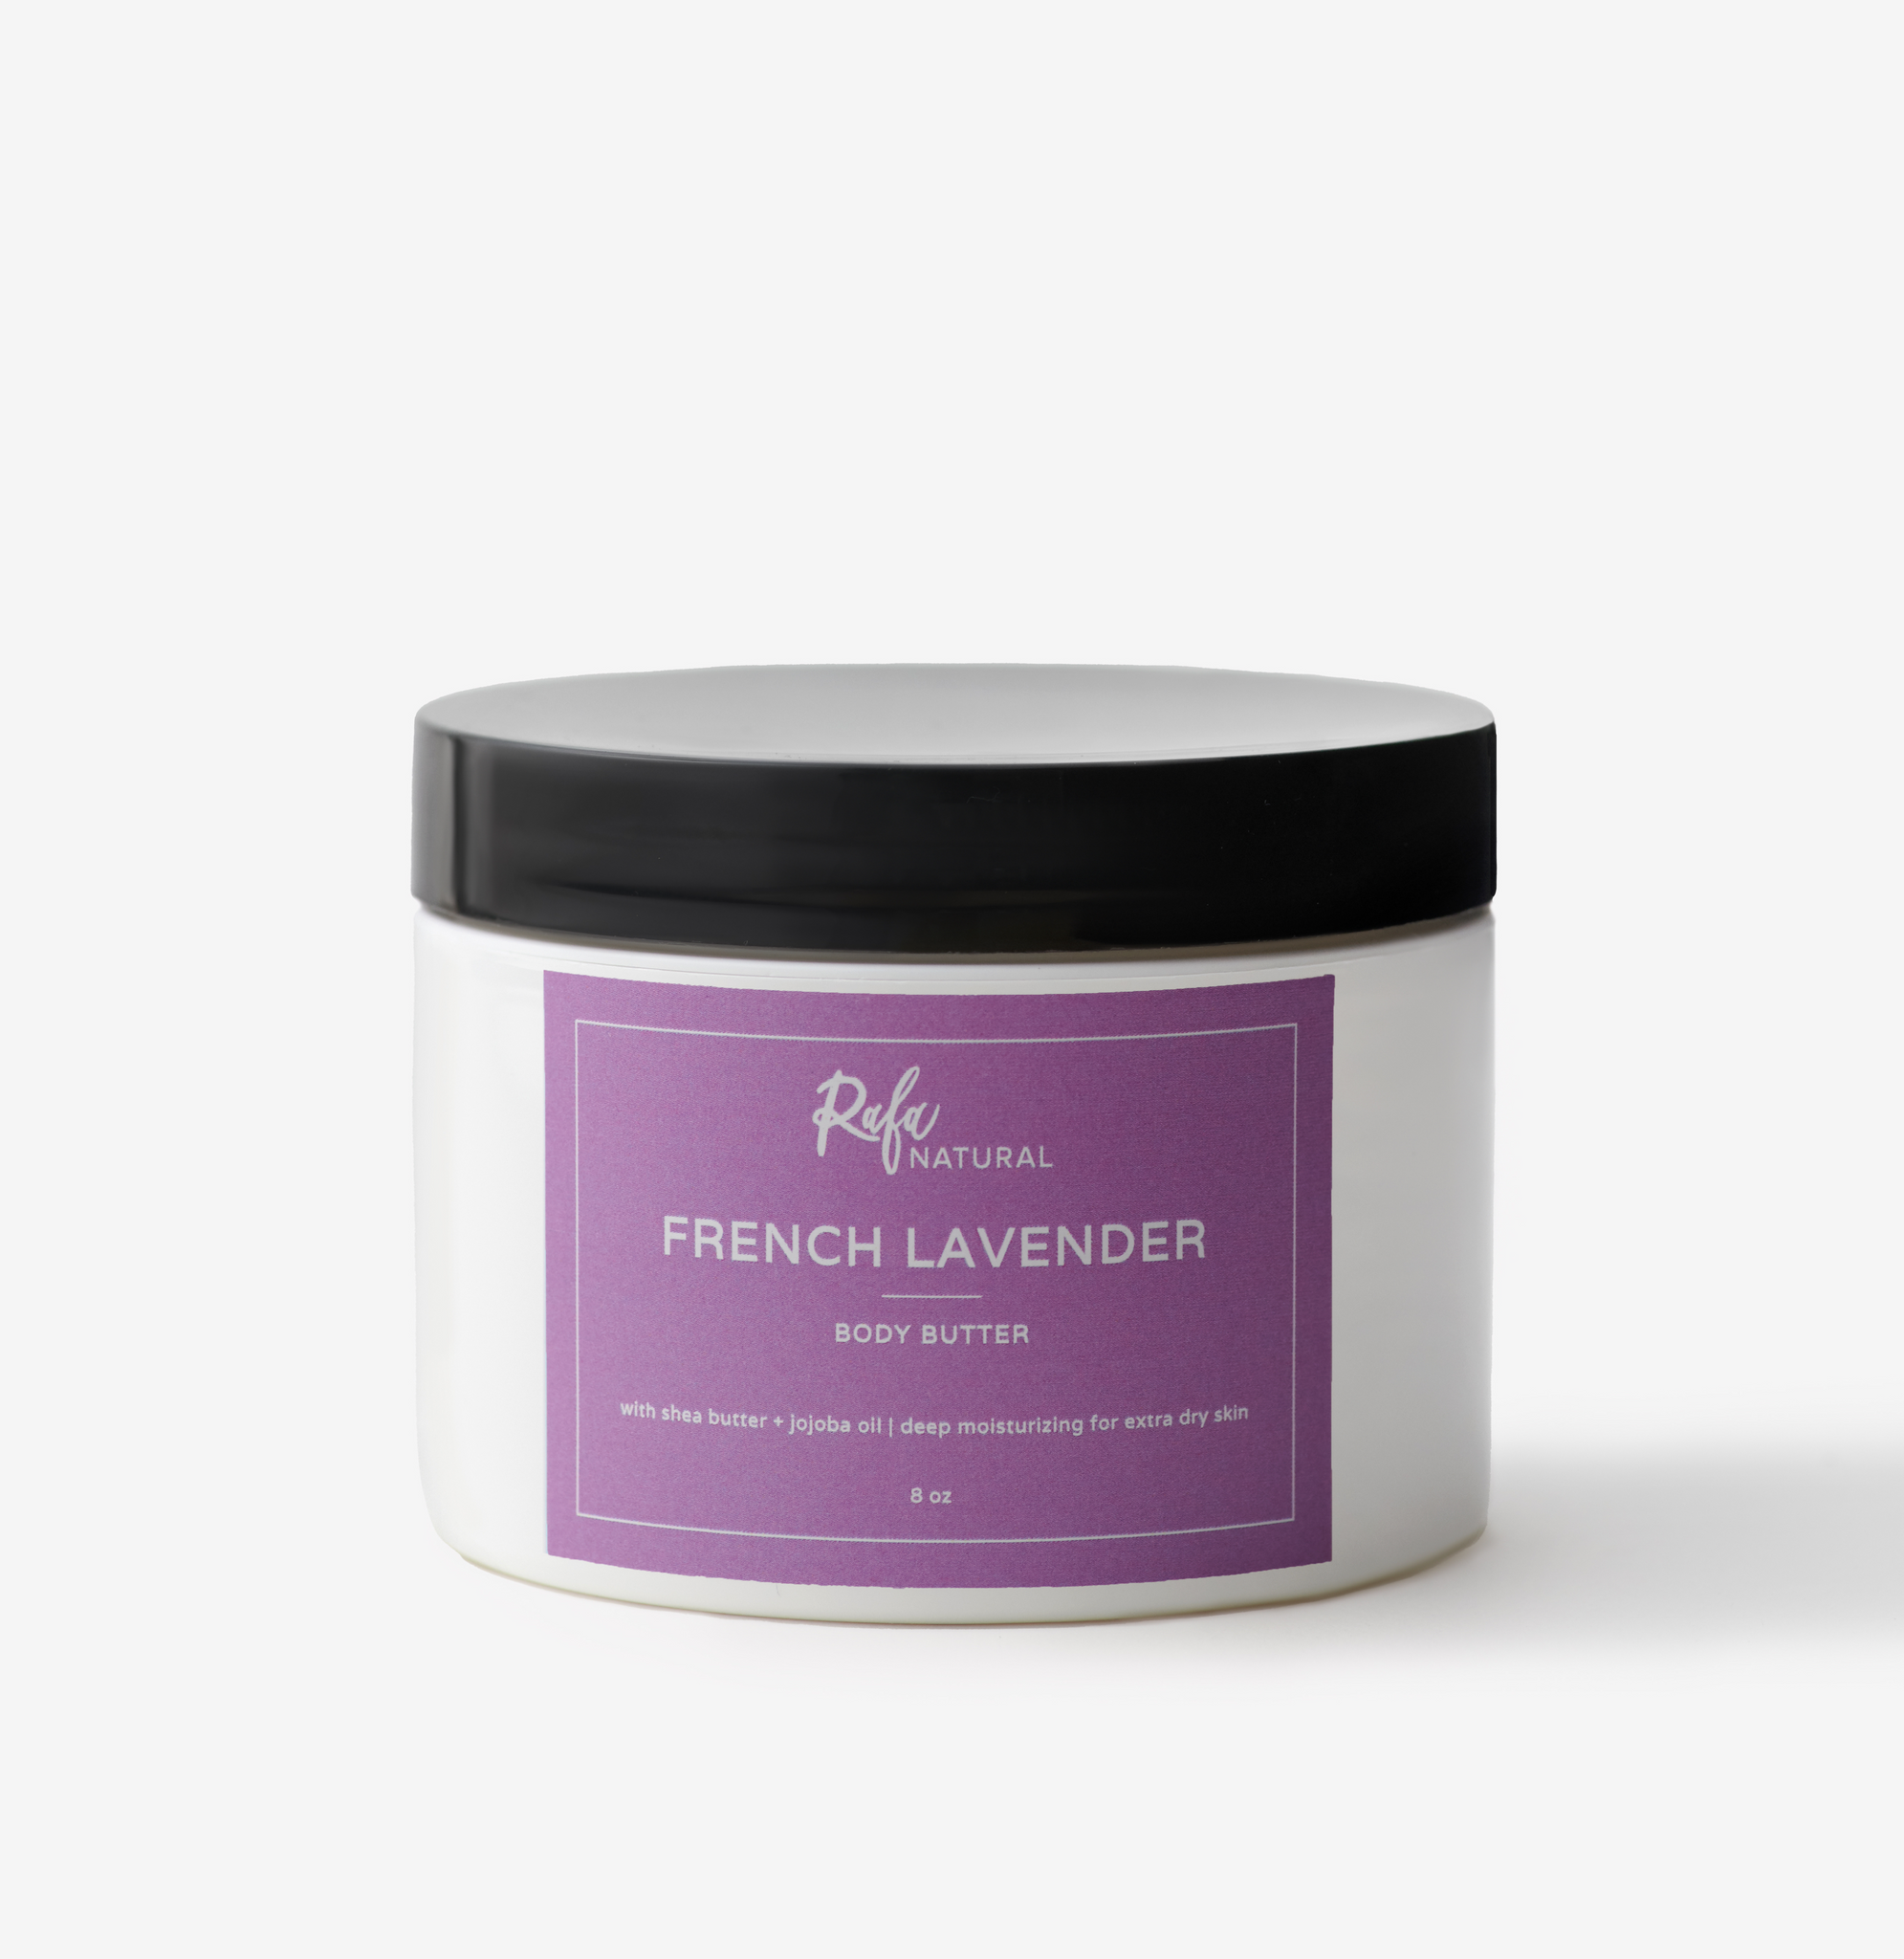 8oz. French Lavender Body Butter by Rafa Natural